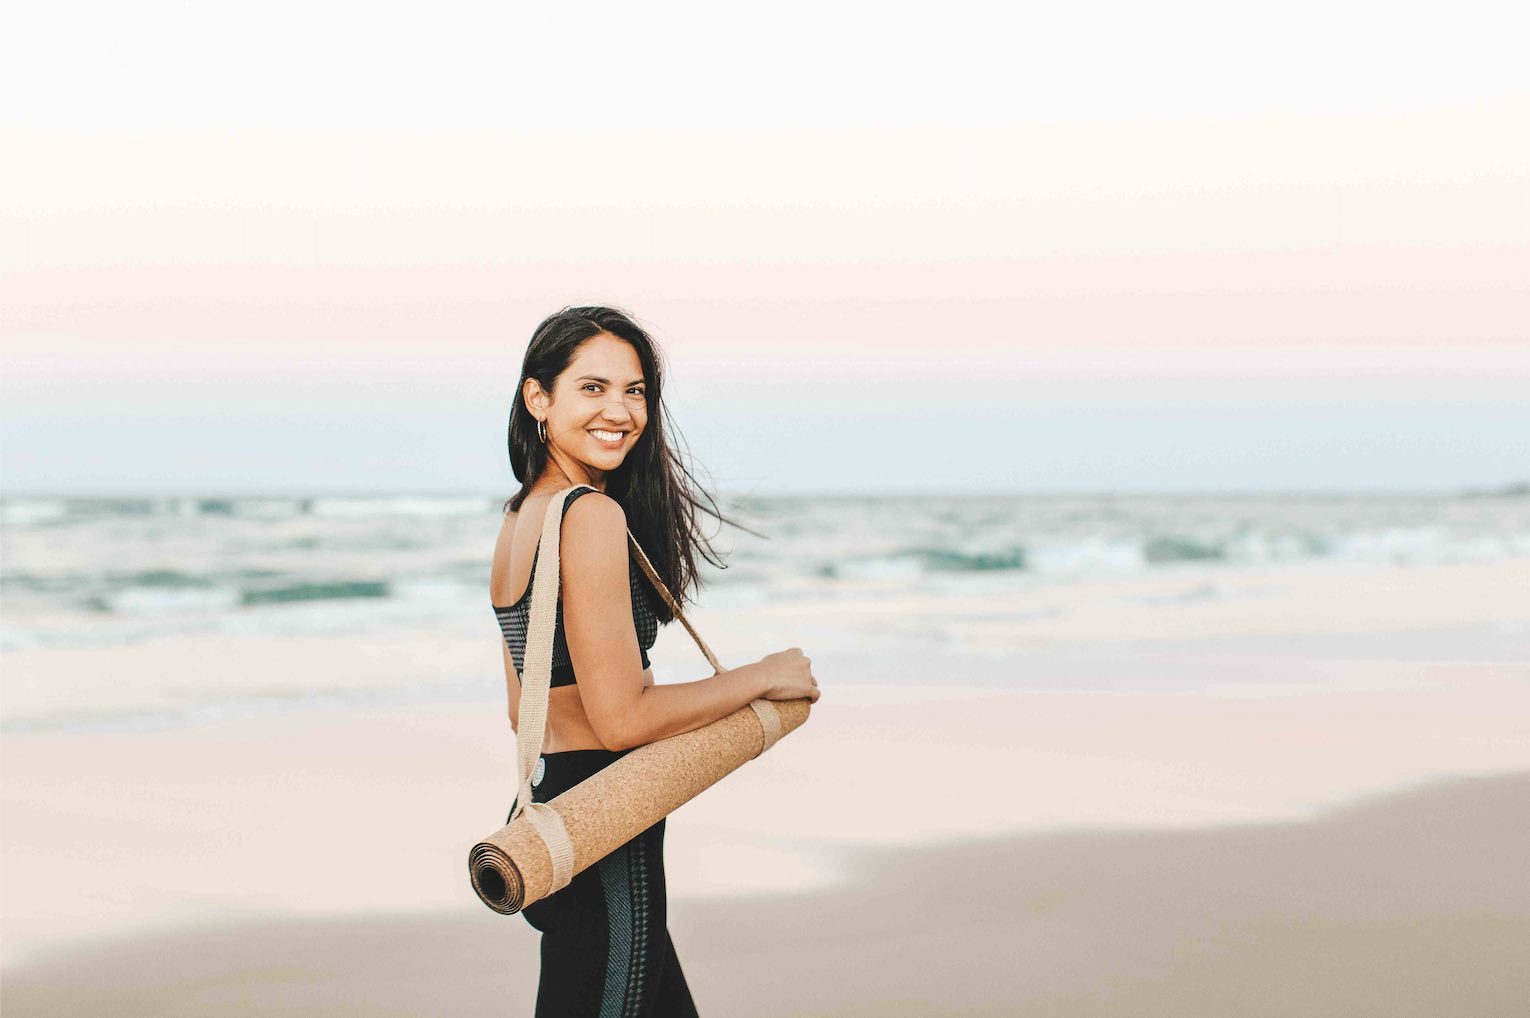 5 MINUTES WITH RACHAEL ATTARD FROM LEAN LEGS